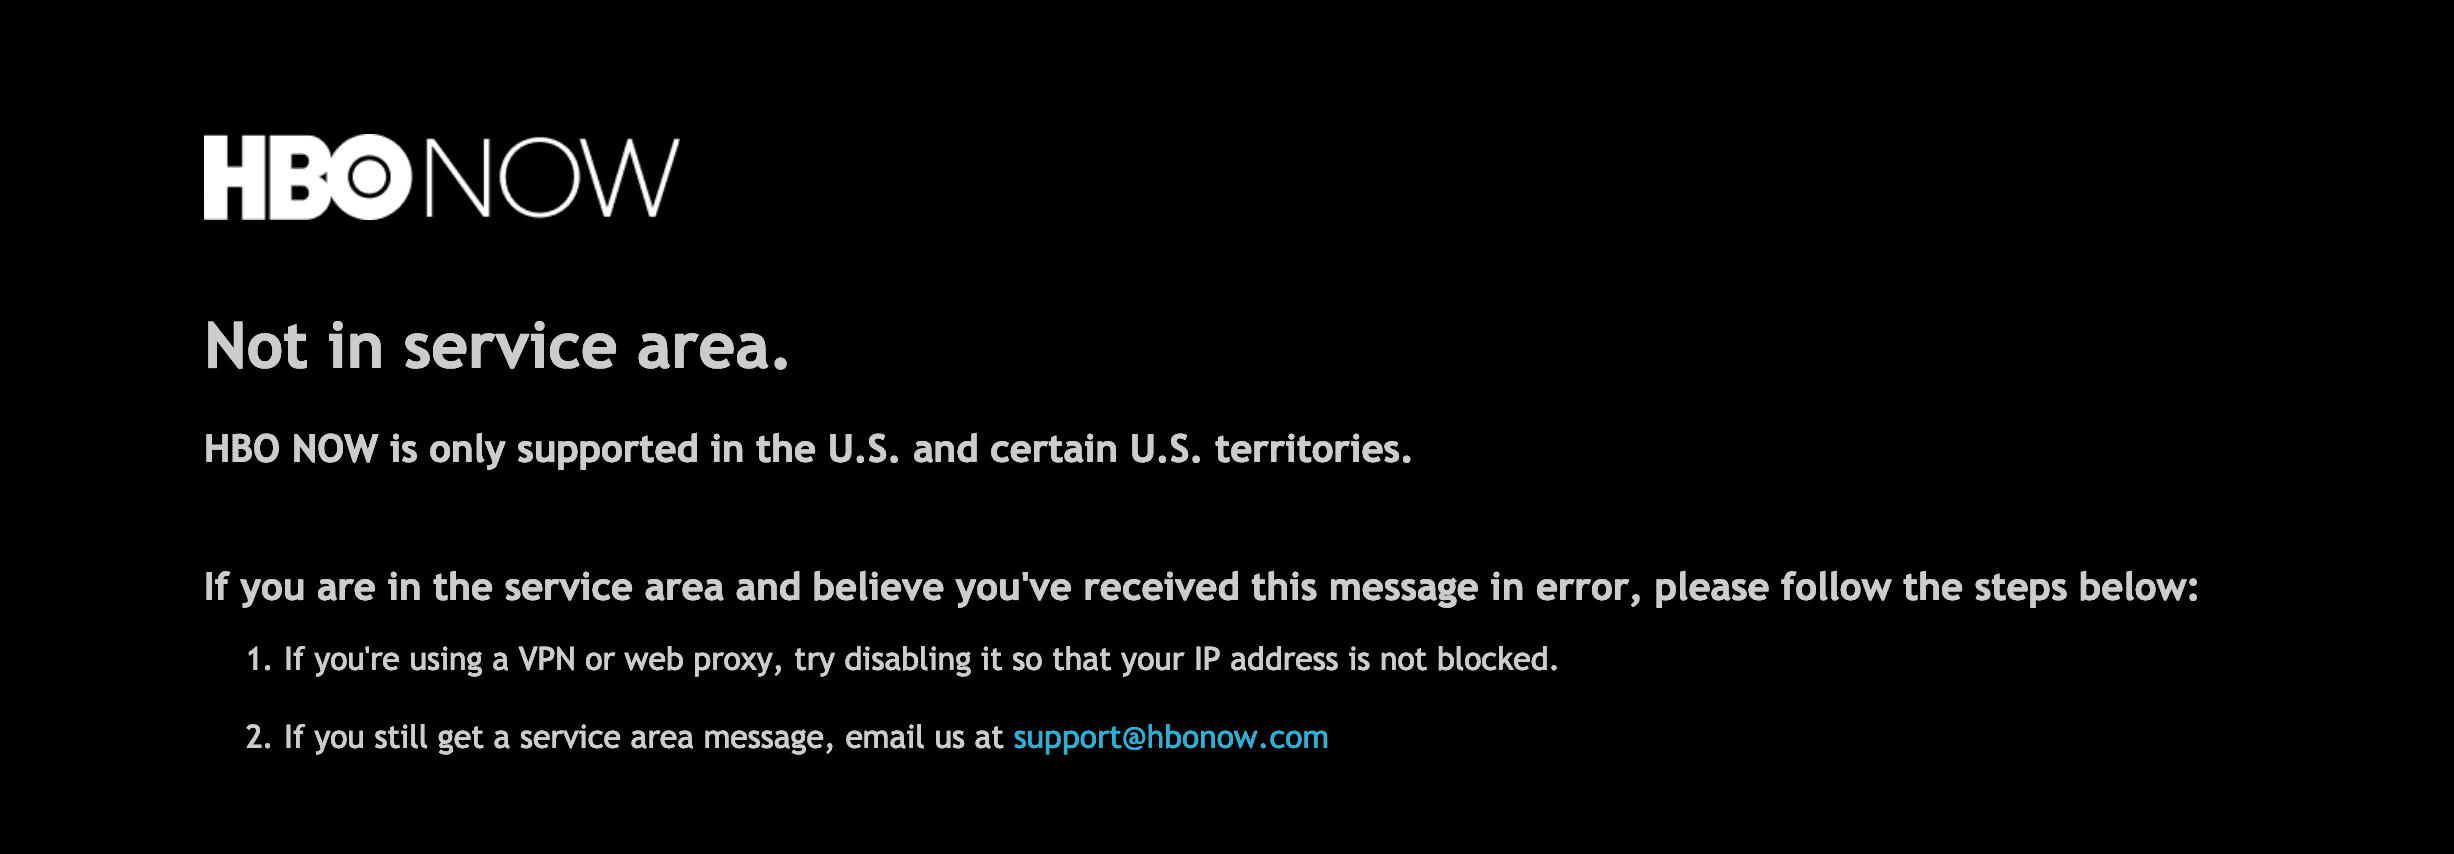 HBO Now message. Not in service area. HBO NOW is only supported in the U.S. and certain U.S. territories.